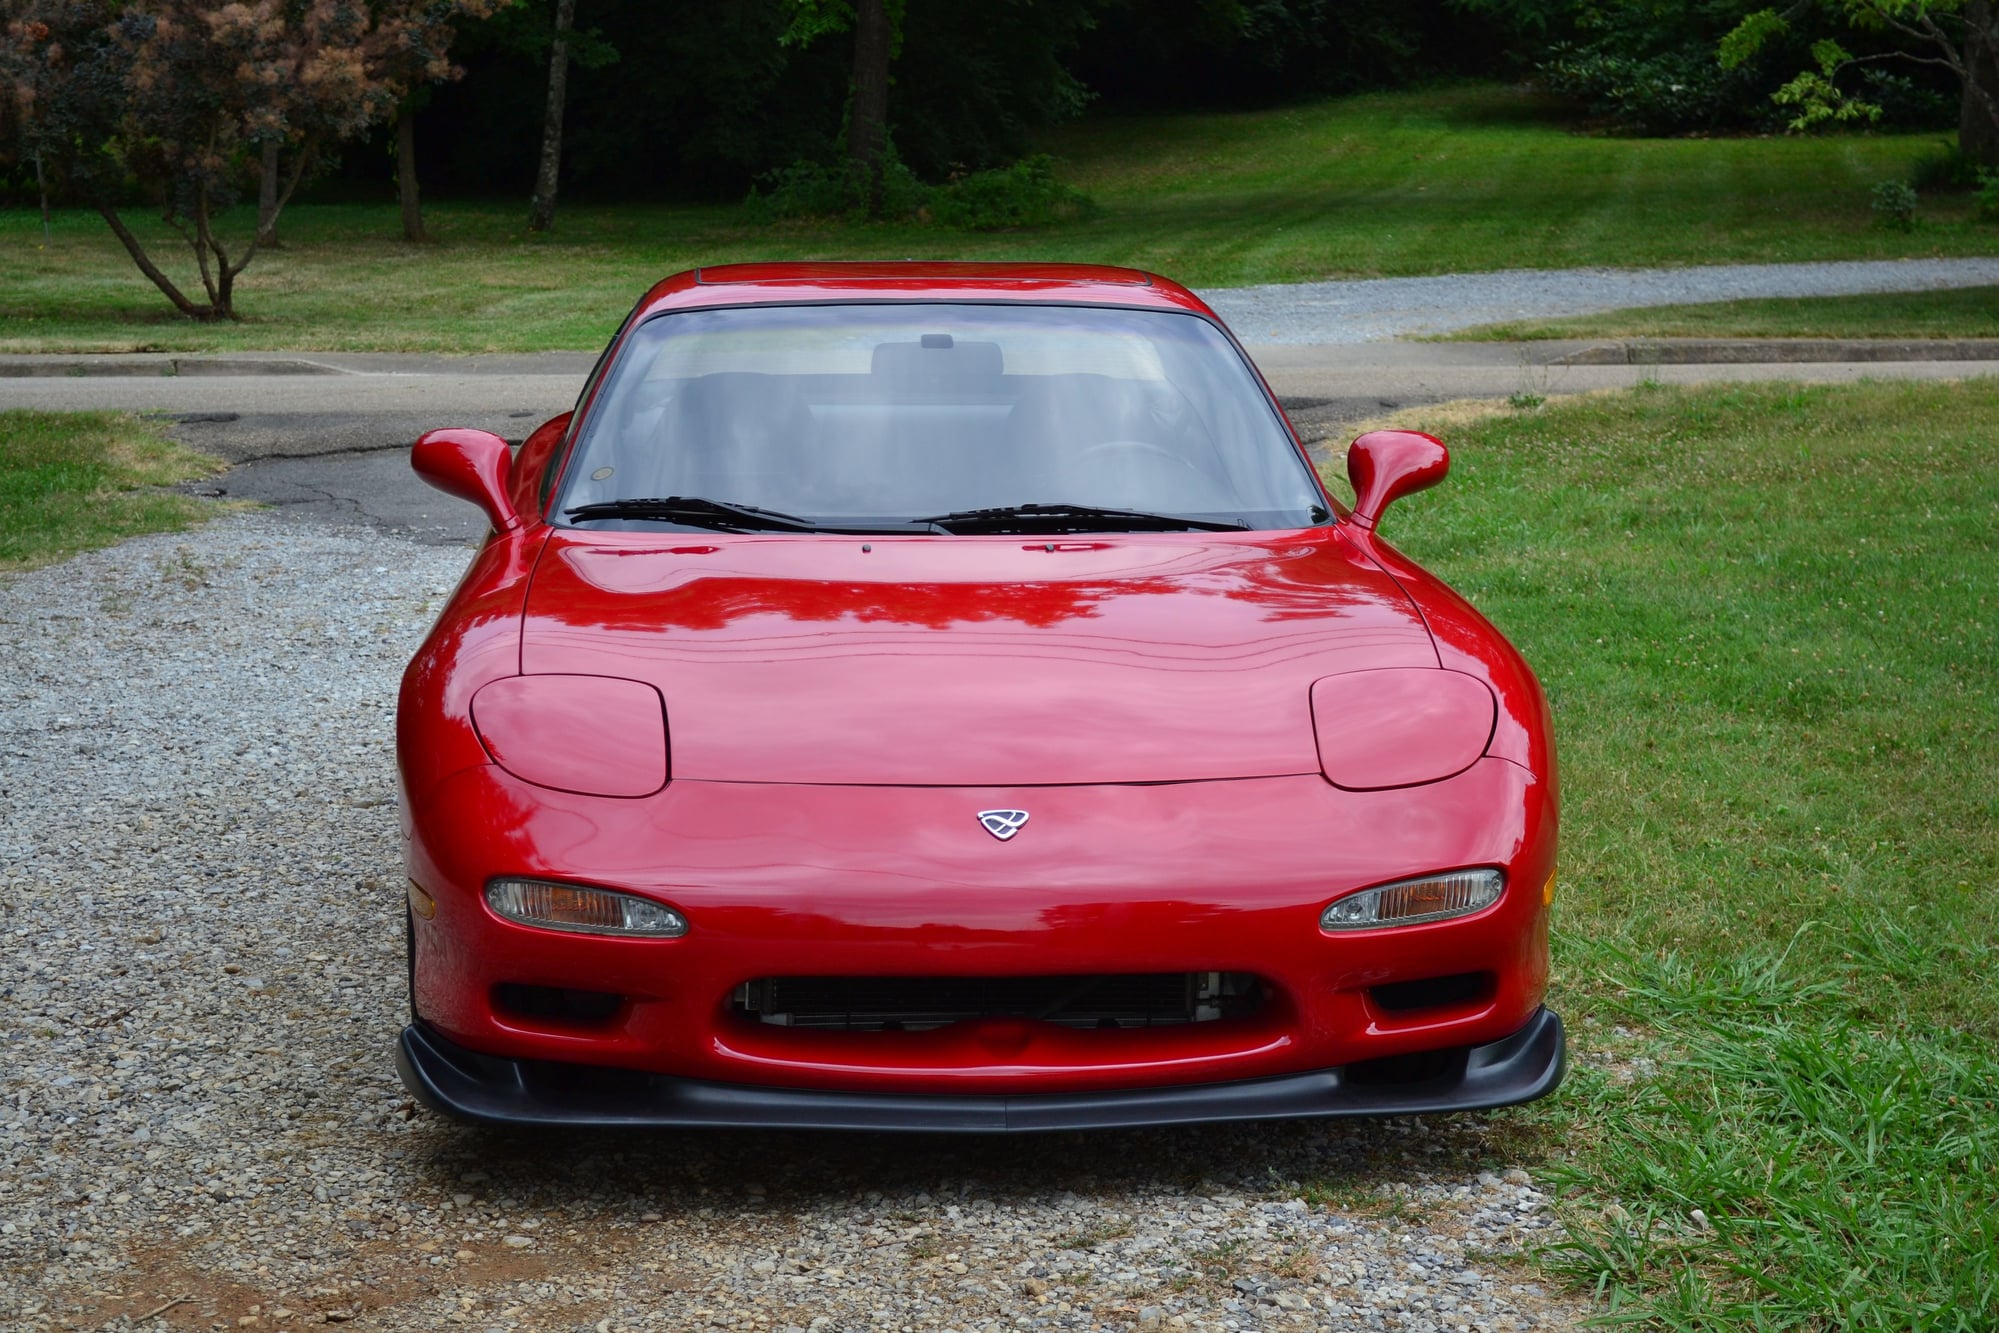 1993 Mazda RX-7 - 93 FD with LS1/T-56 - Used - VIN JM1FD3317P0207645 - 60,161 Miles - 8 cyl - 2WD - Manual - Coupe - Red - Knoxville, TN 37909, United States